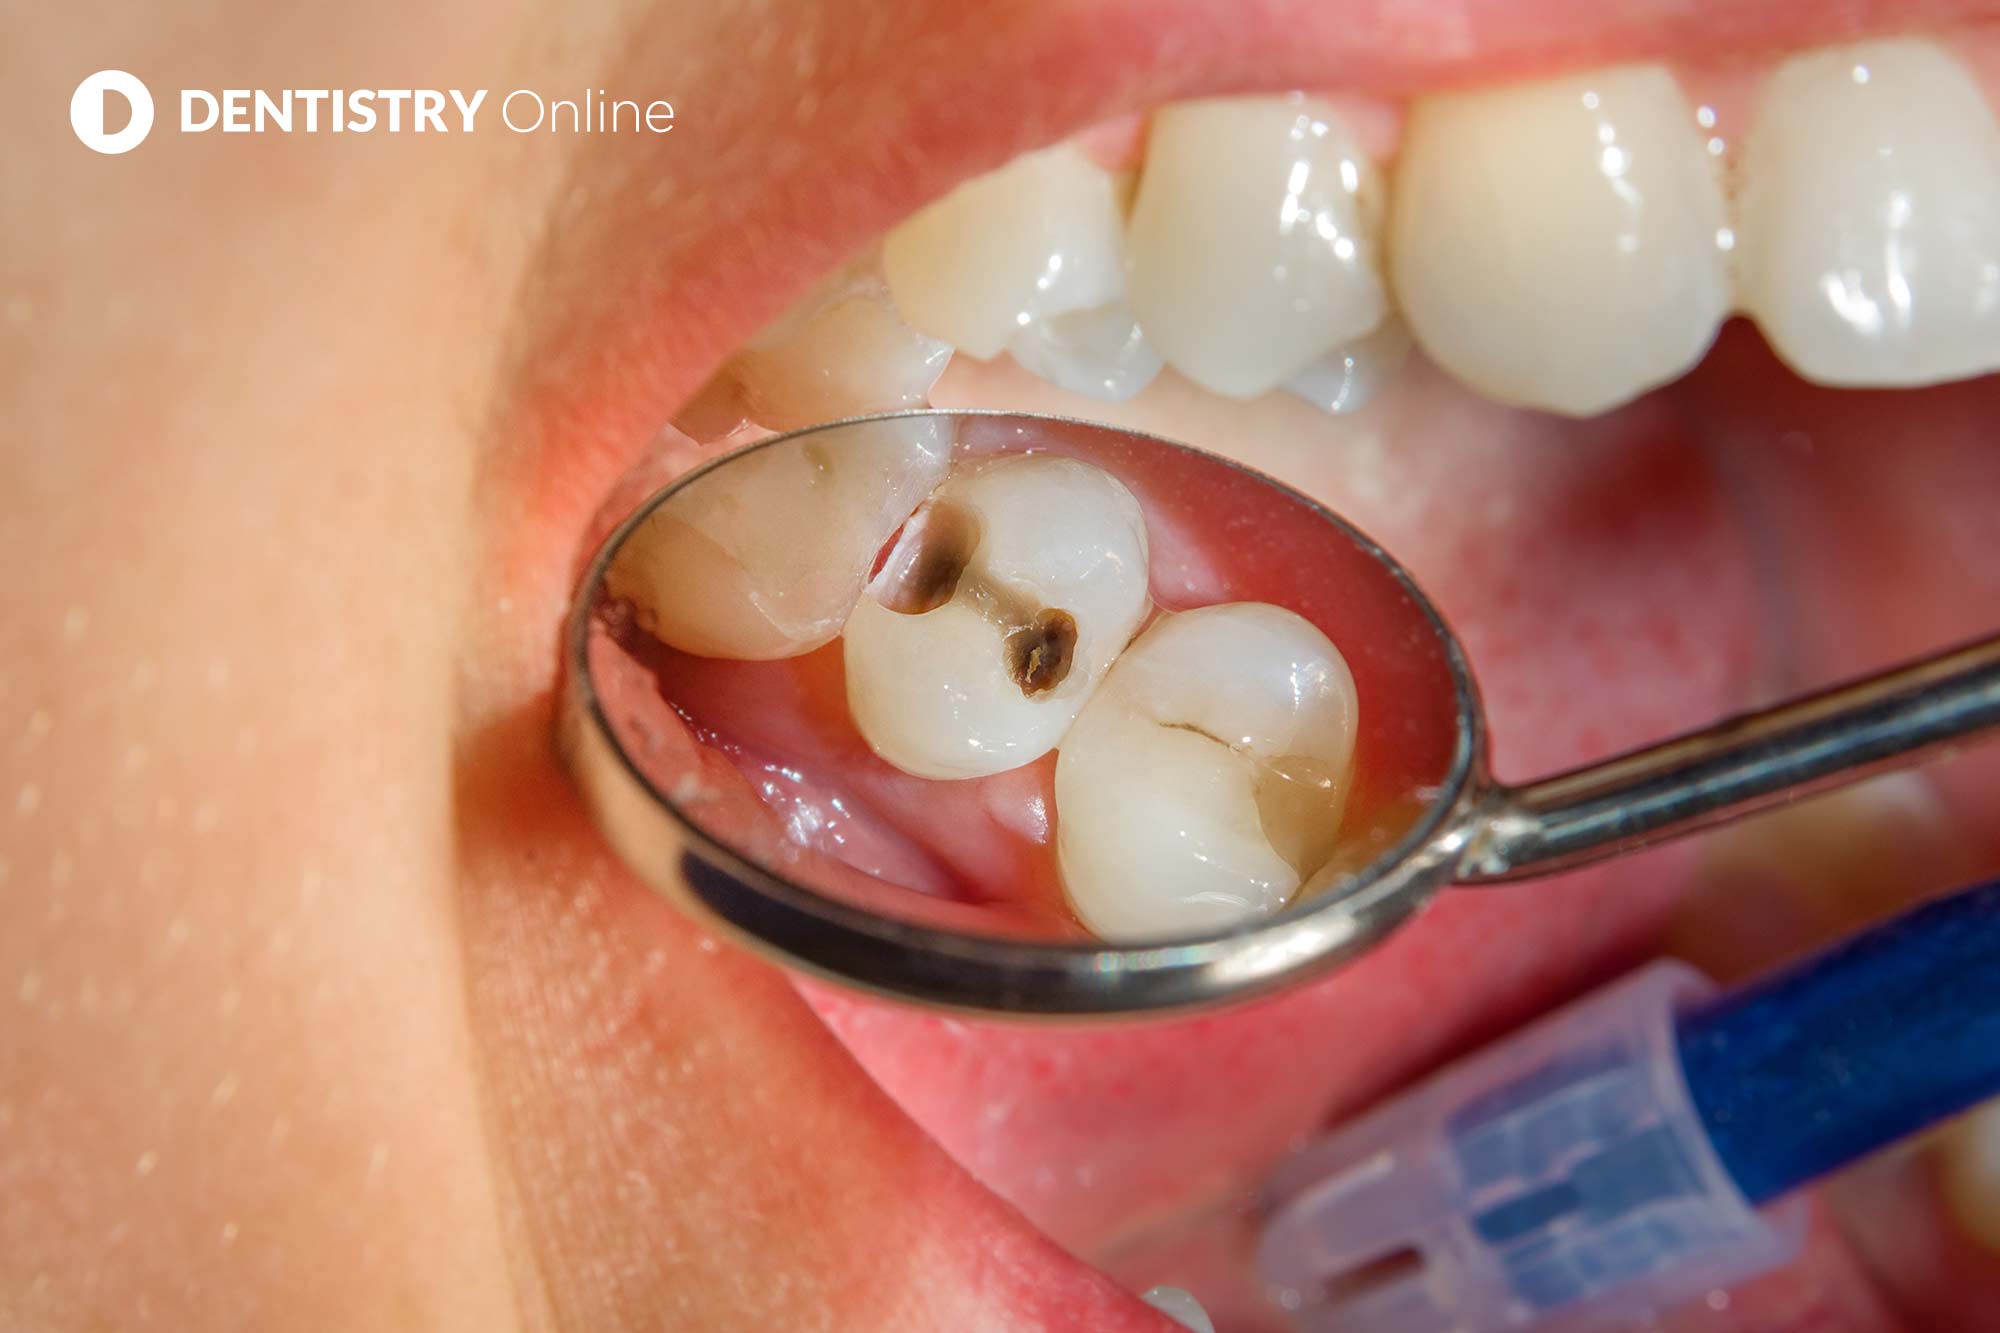 Eight in 10 at increased risk of caries since pandemic, research shows